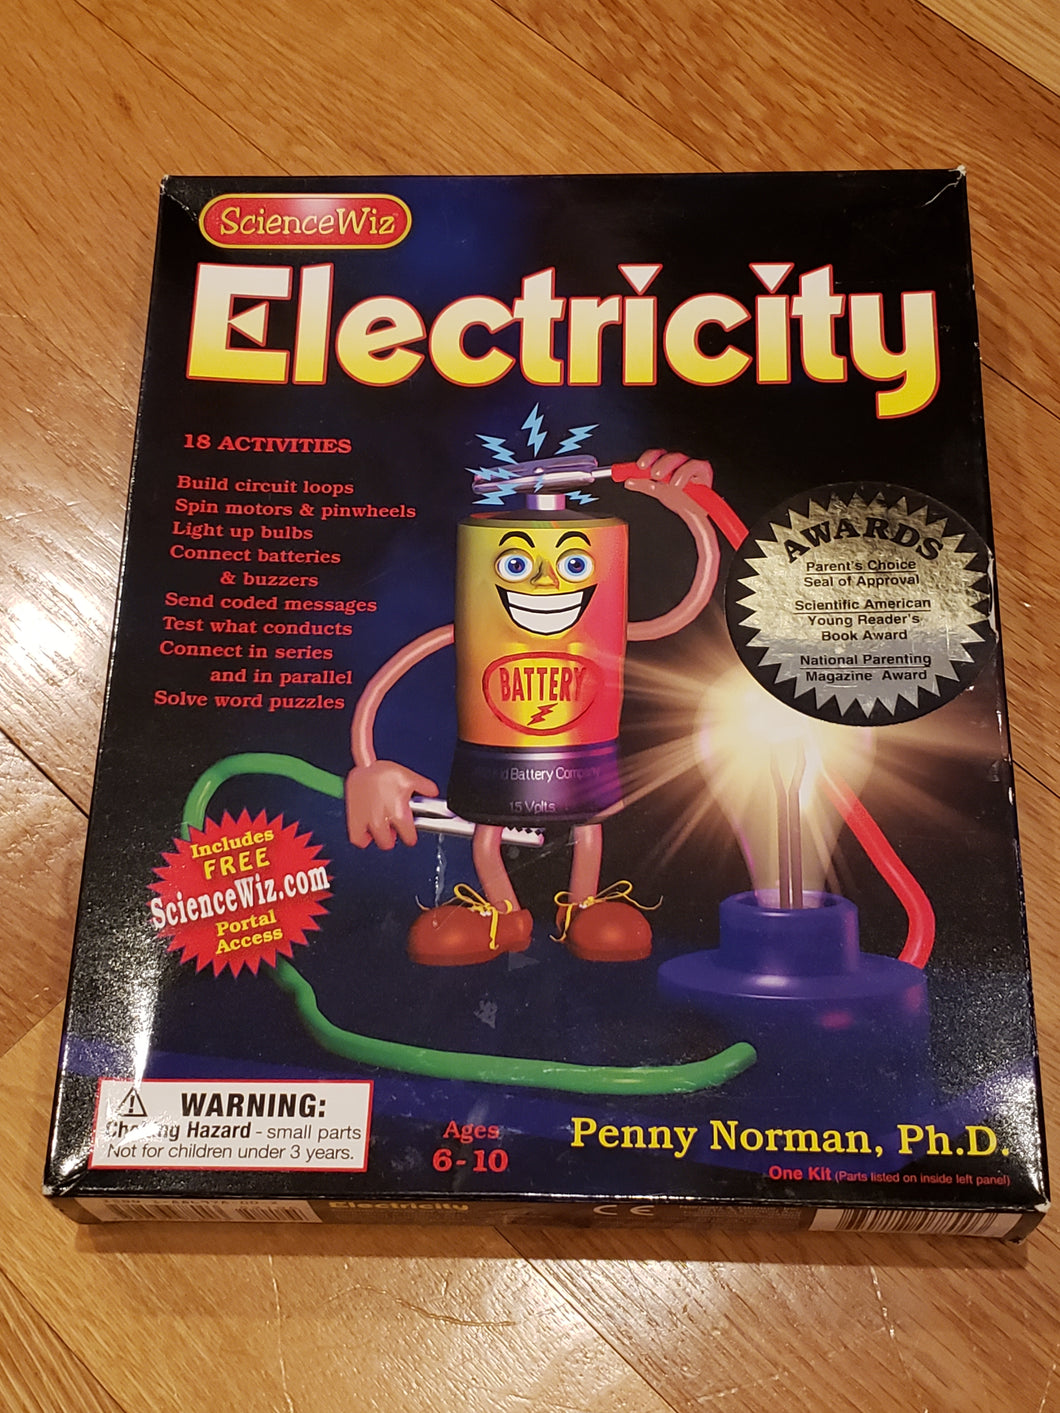 Science Wiz Electricity Kit.  Includes book and experiment pieces